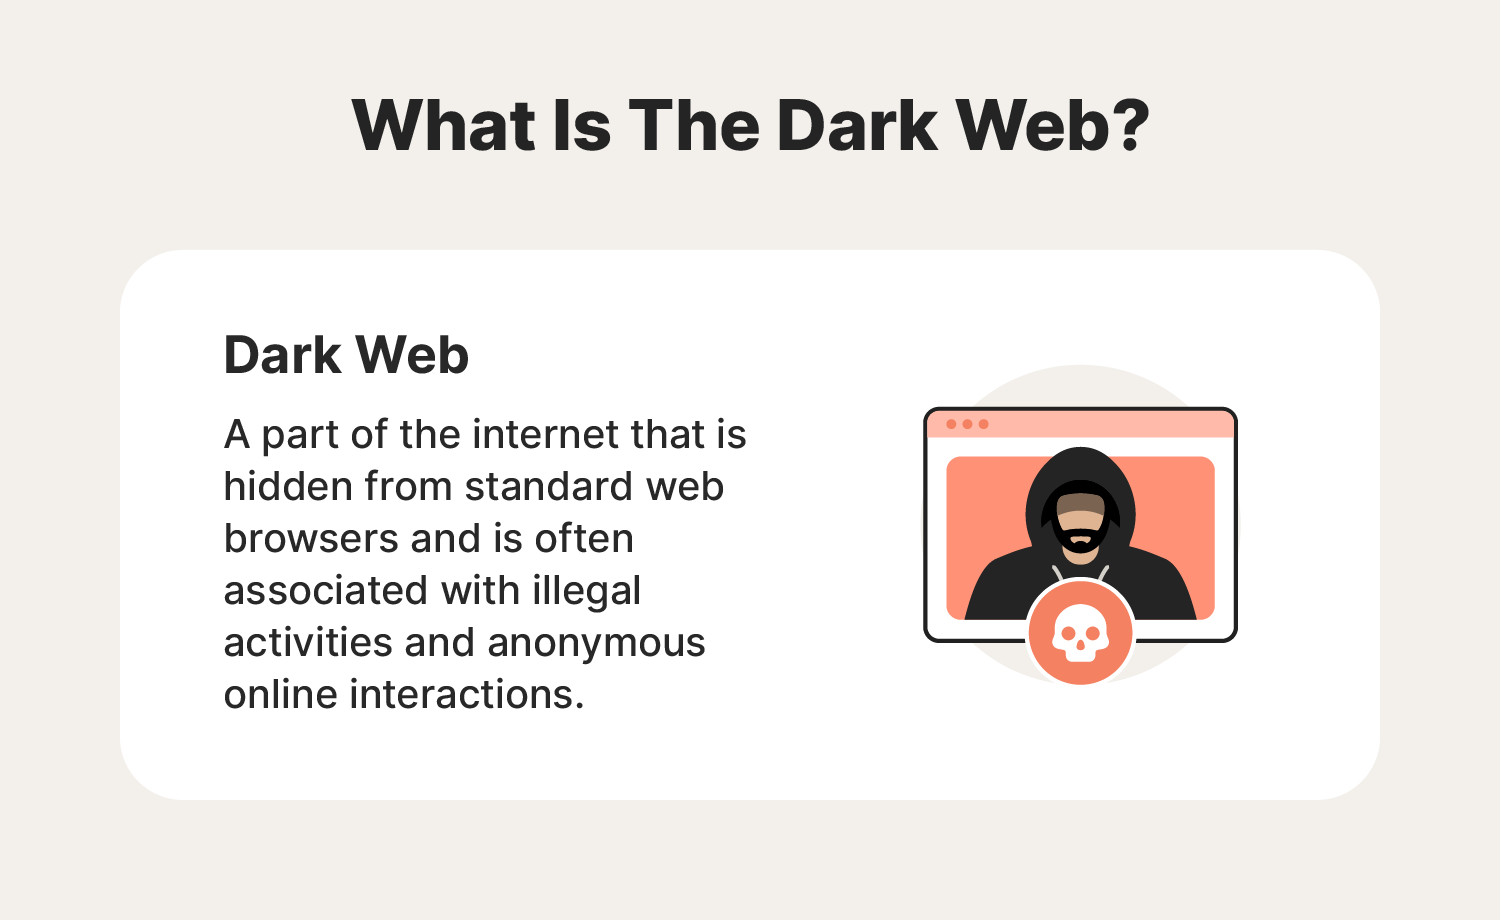 Three components of the internet: the surface web, deep web, and dark web.